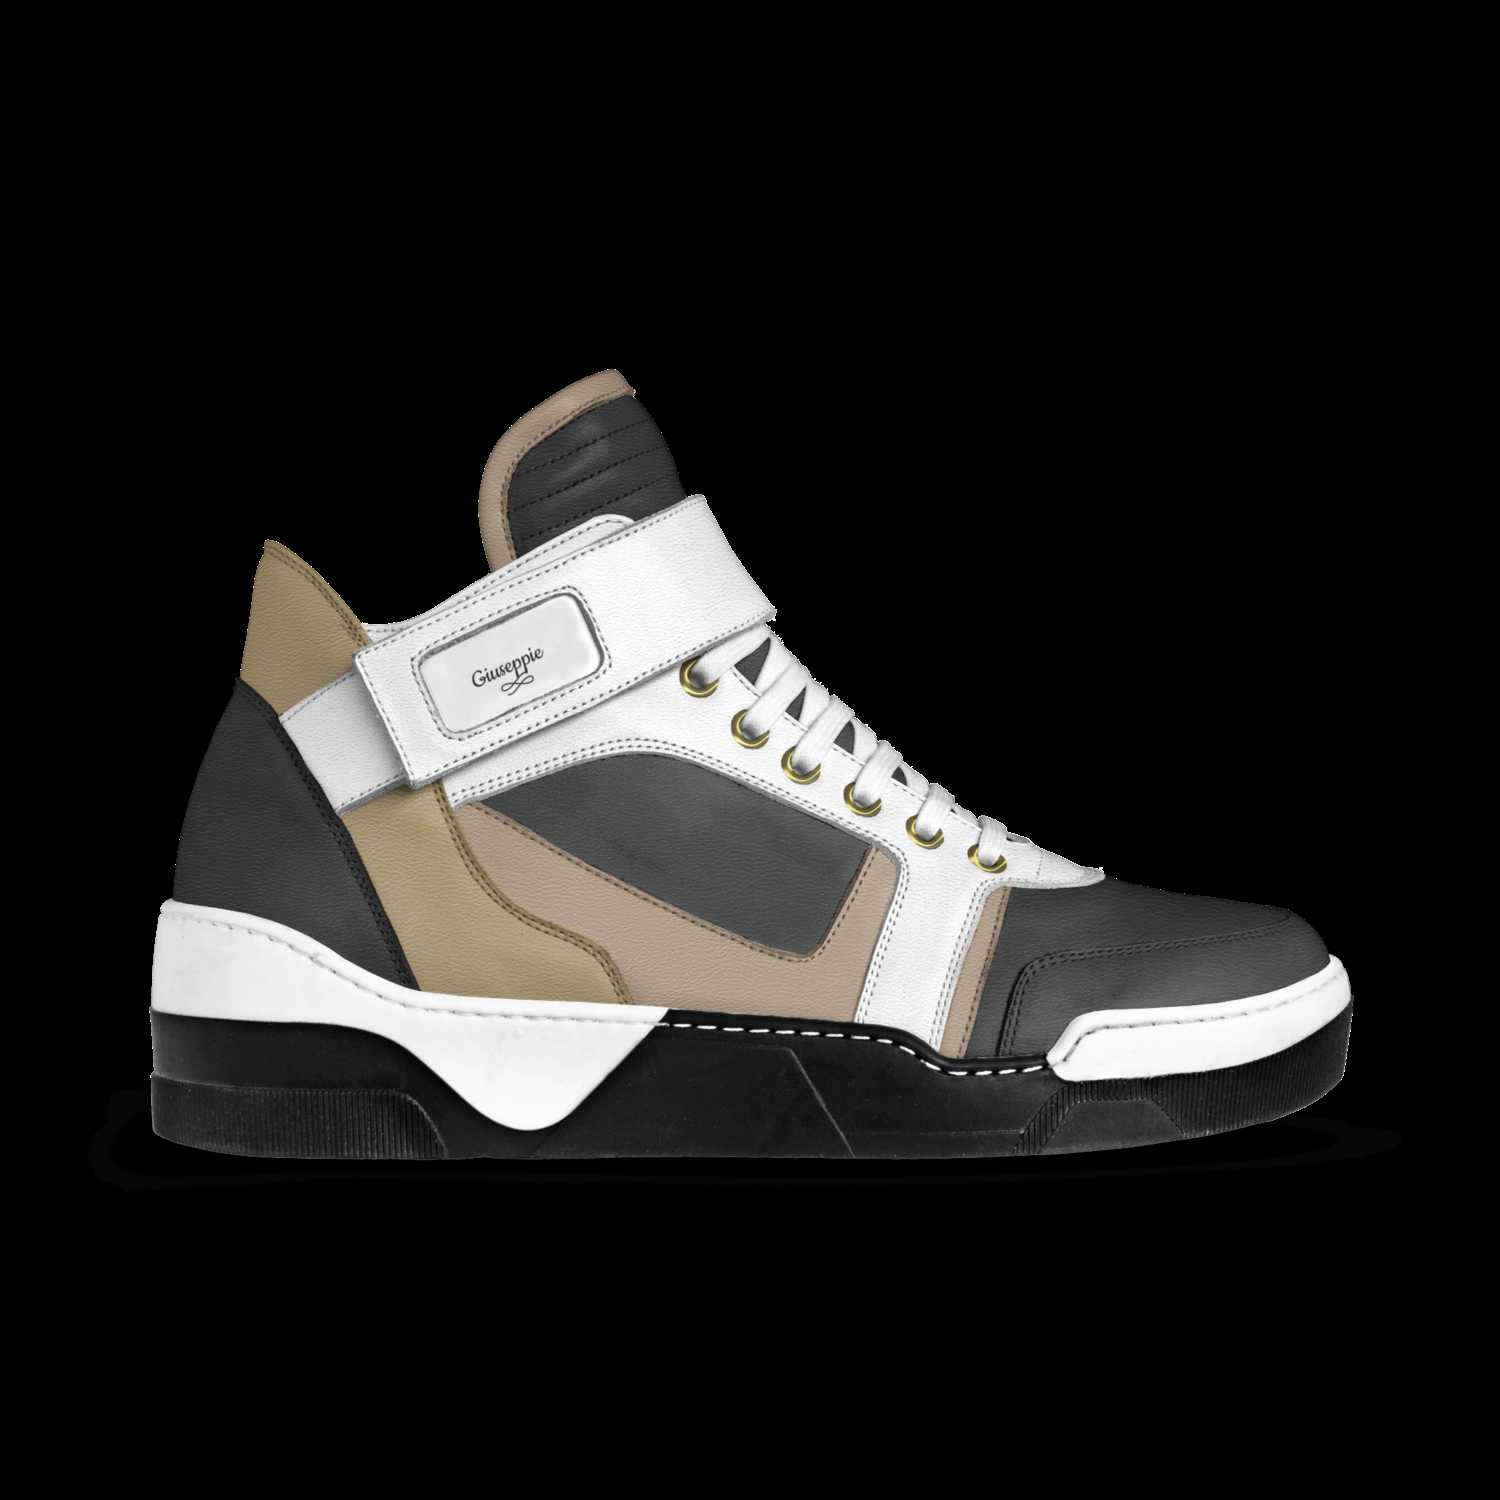 Giuseppe | A Custom Shoe concept by Aaliyah Anthony